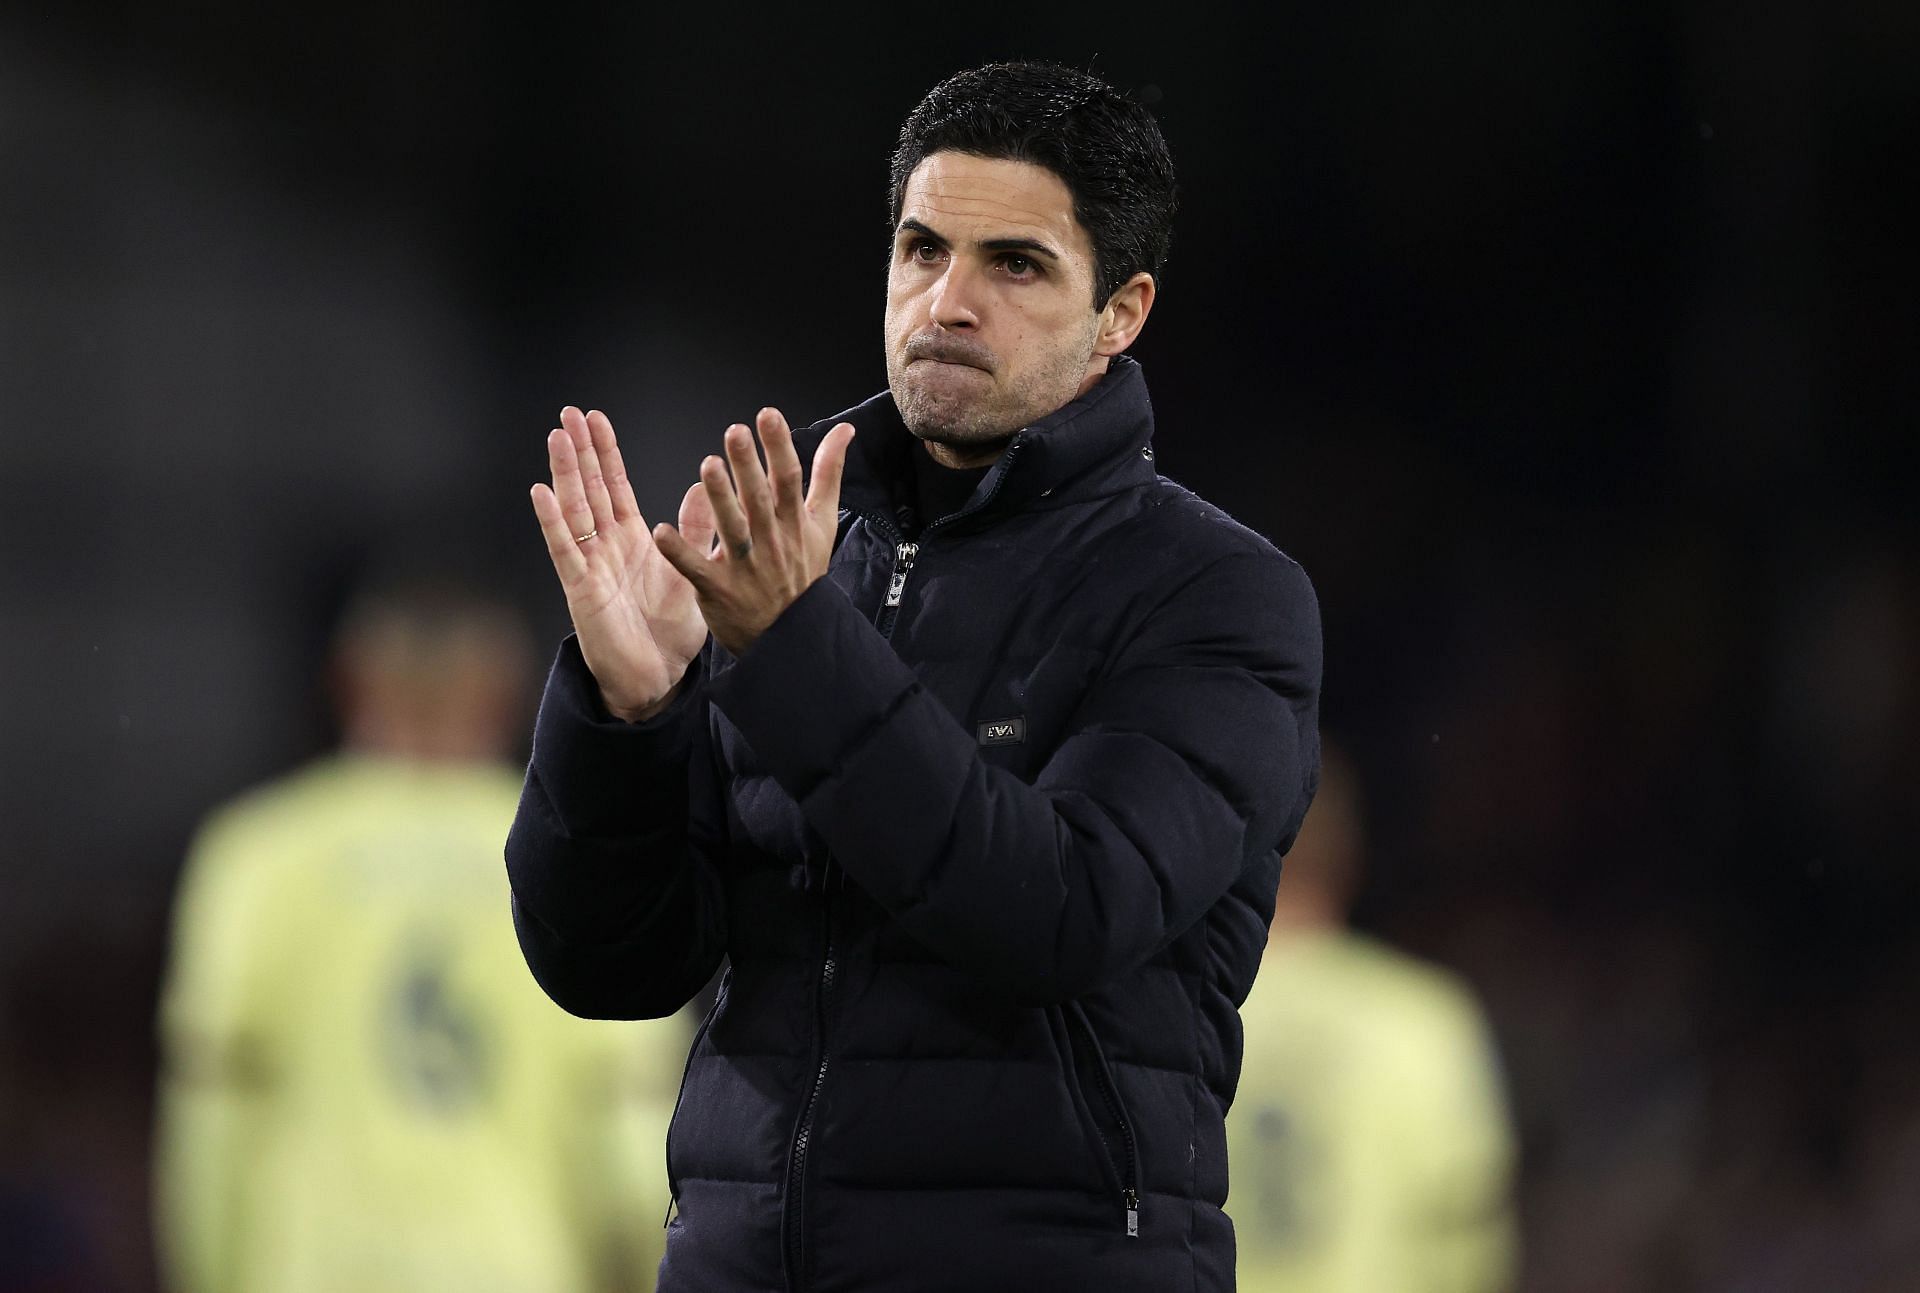 Arsenal manager Mikel Arteta is planning to refurbish his squad this summer.